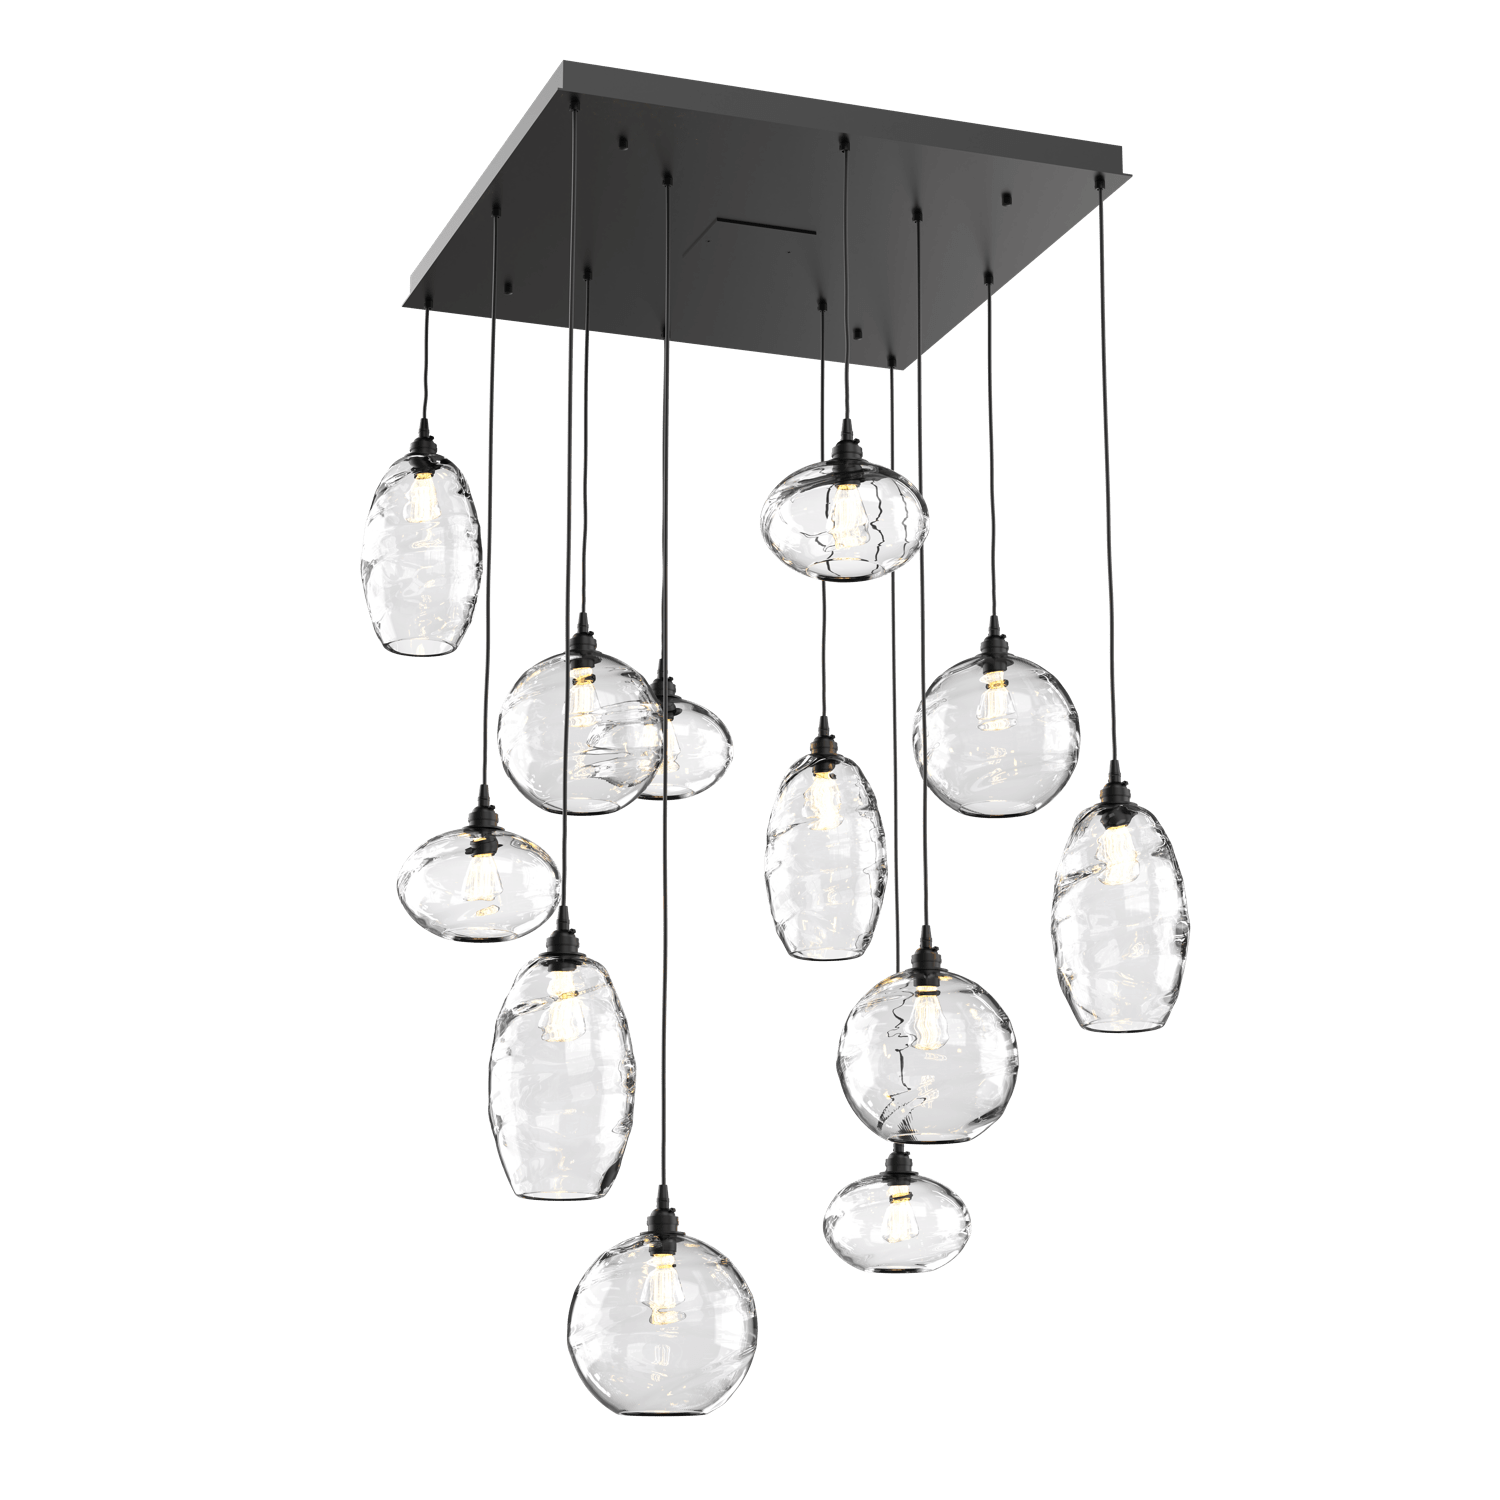 CHB0048-12-MB-OC-Hammerton-Studio-Optic-Blown-Glass-Misto-12-light-square-pendant-chandelier-with-matte-black-finish-and-optic-clear-blown-glass-shades-and-incandescent-lamping